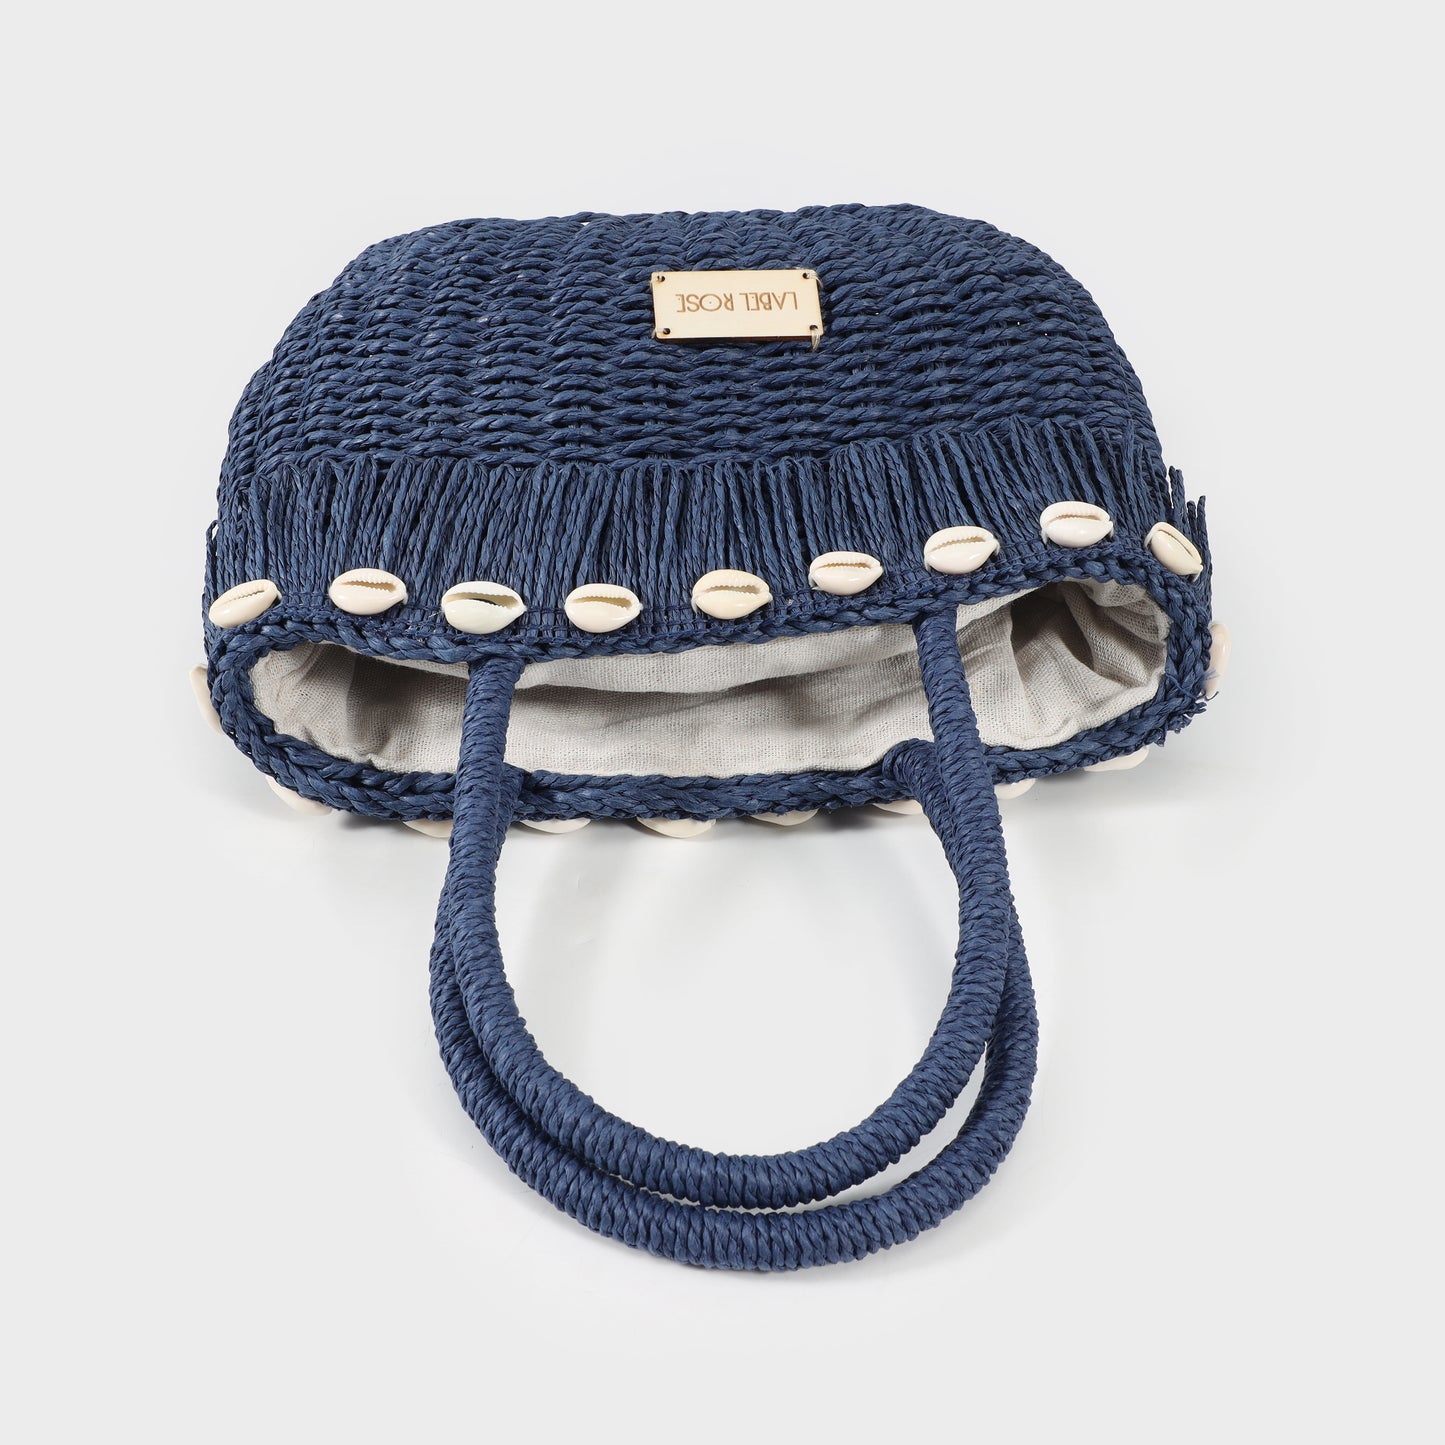 Straw bag with shells - BLUE